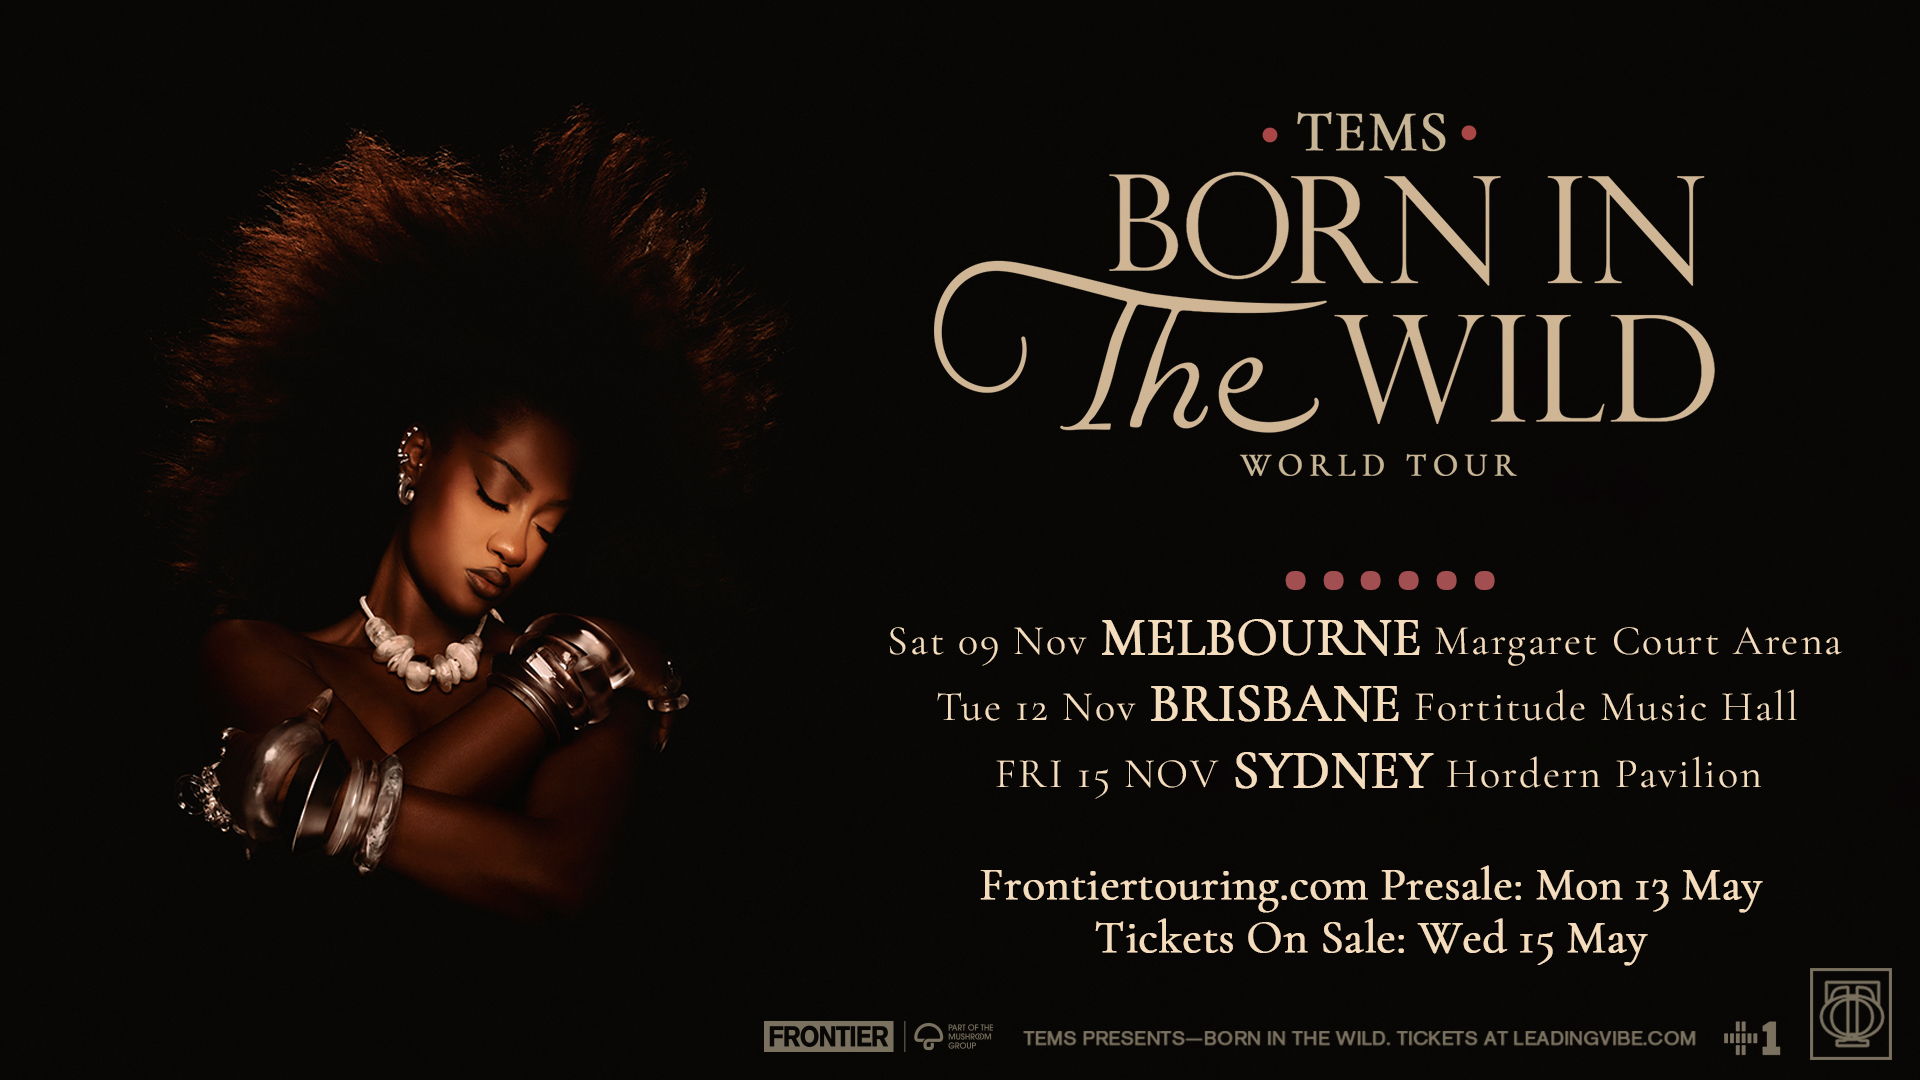 TEMS BRINGS HER BORN IN THE WILD TOUR TO AUSTRALIA THIS NOVEMBER 